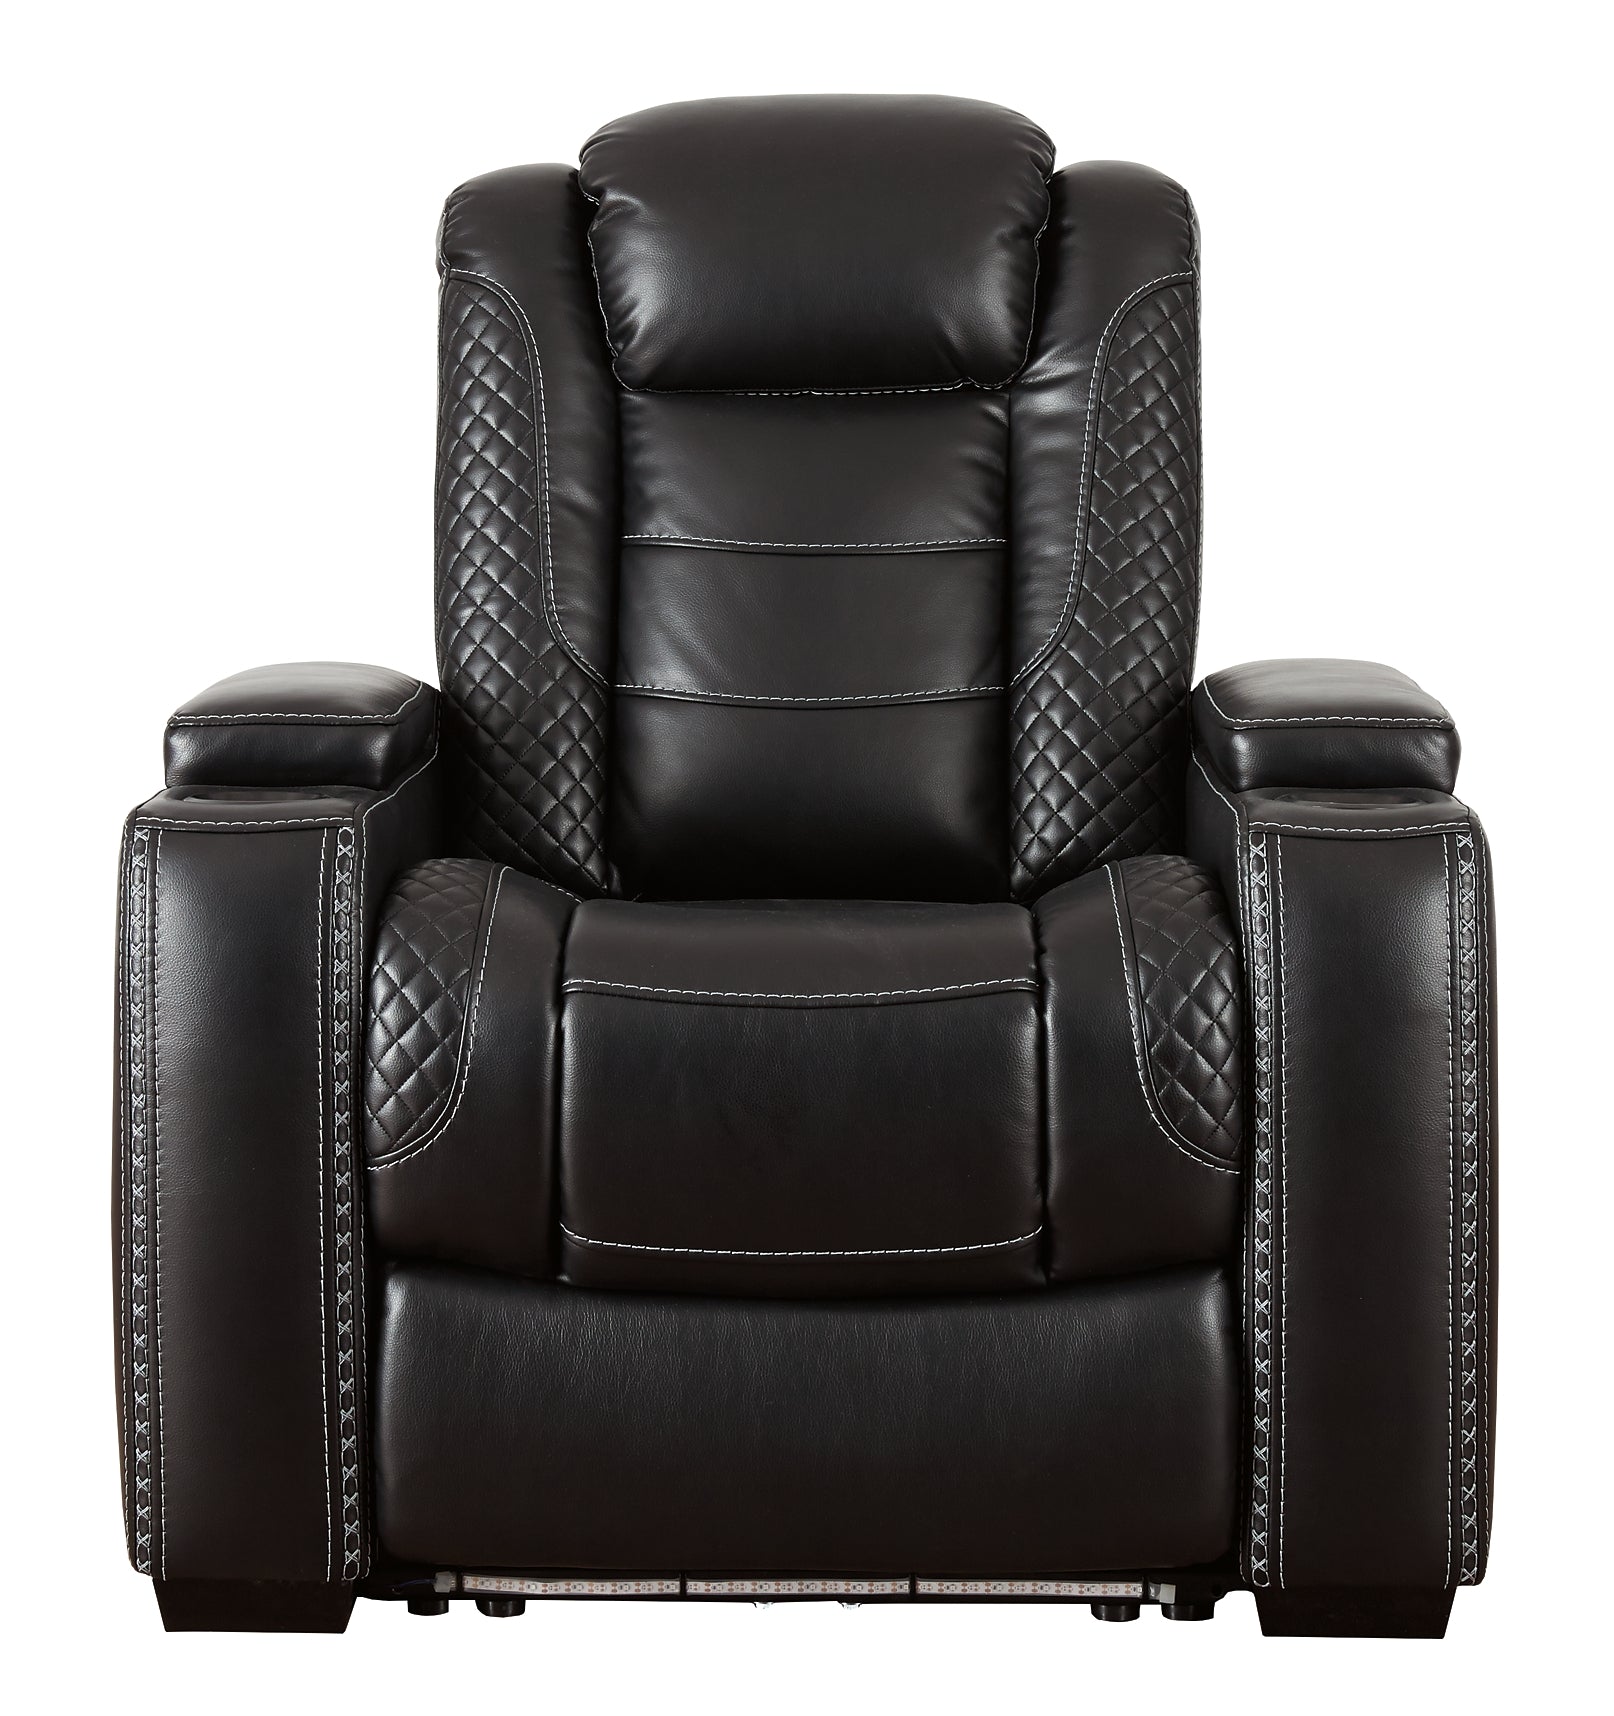 Party Time PWR Recliner/ADJ Headrest at Cloud 9 Mattress & Furniture furniture, home furnishing, home decor